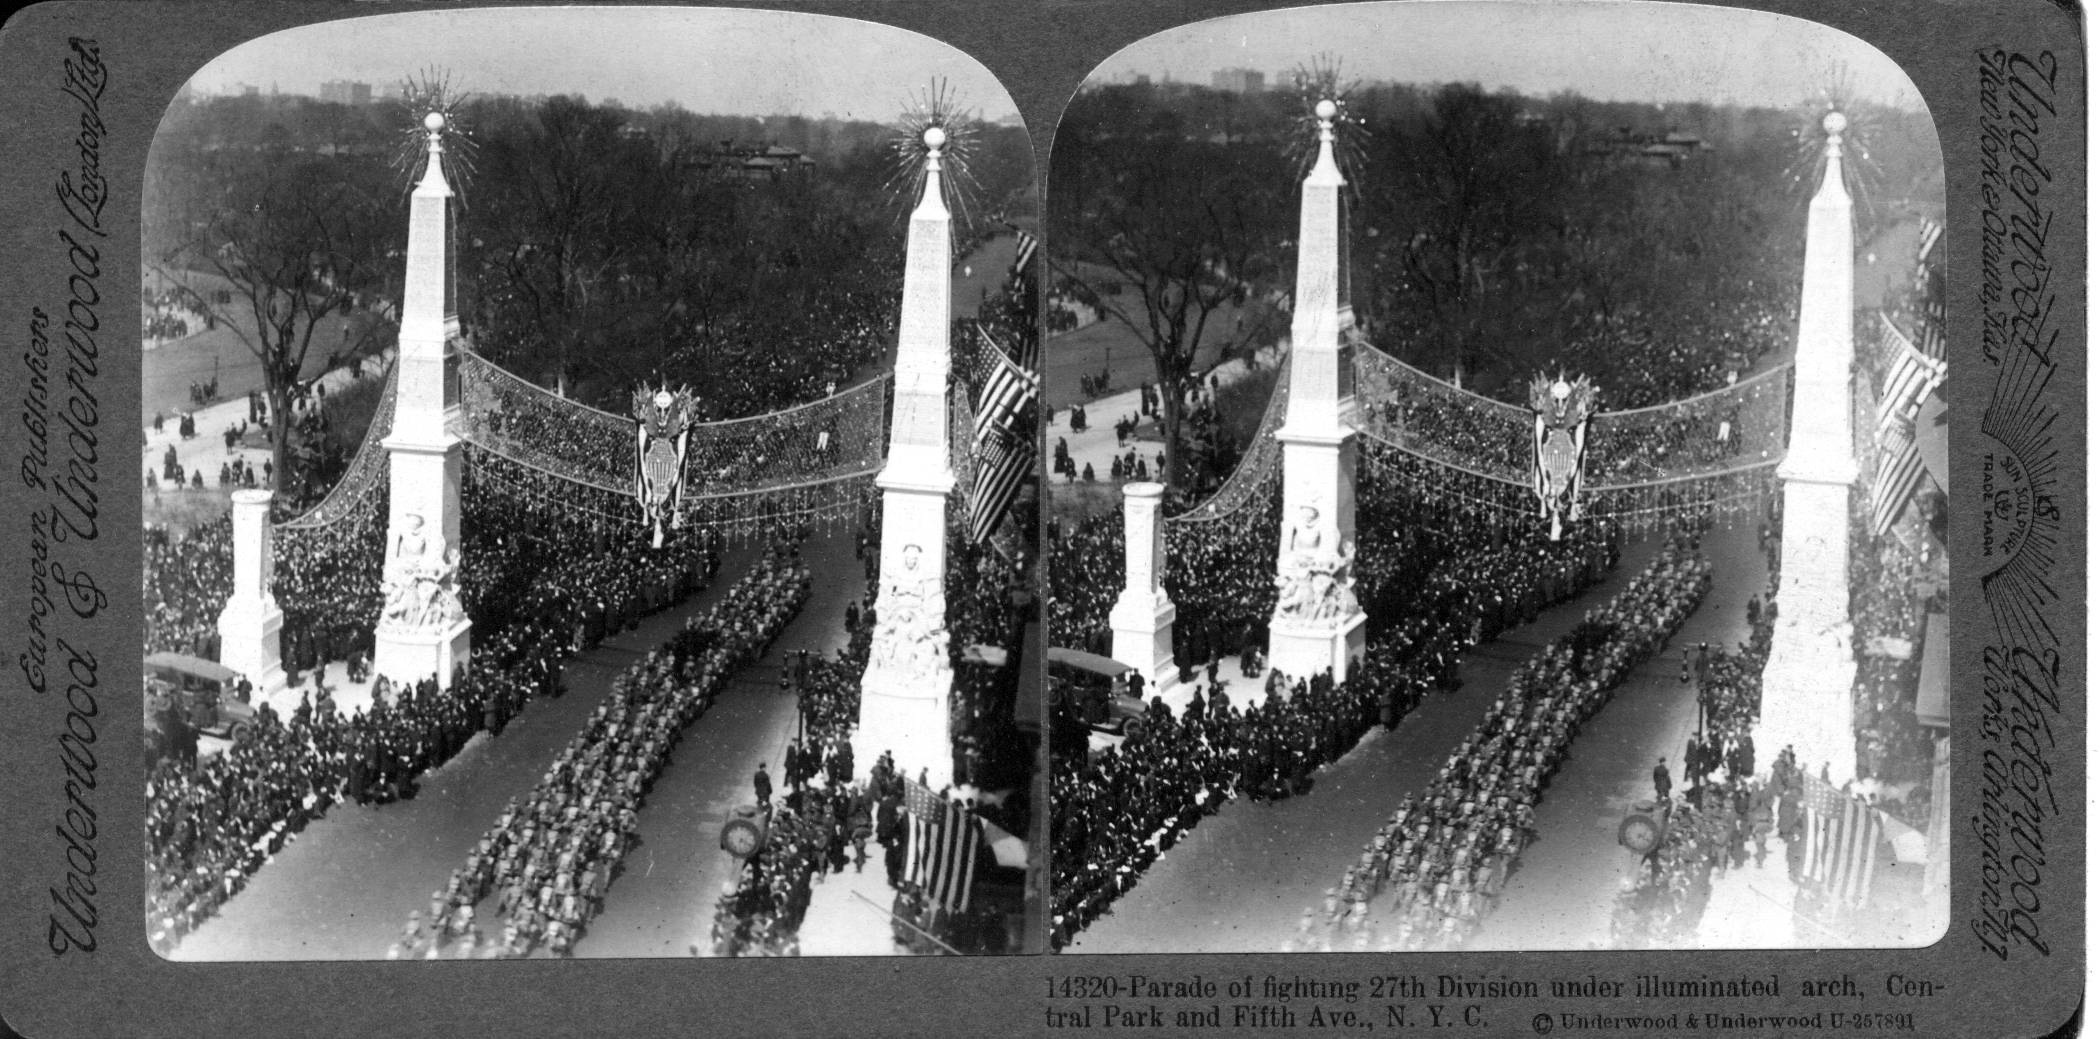 Parade of fighting 27th Division under illuminated arch, Central Park and Fifth Ave., N.Y.C.